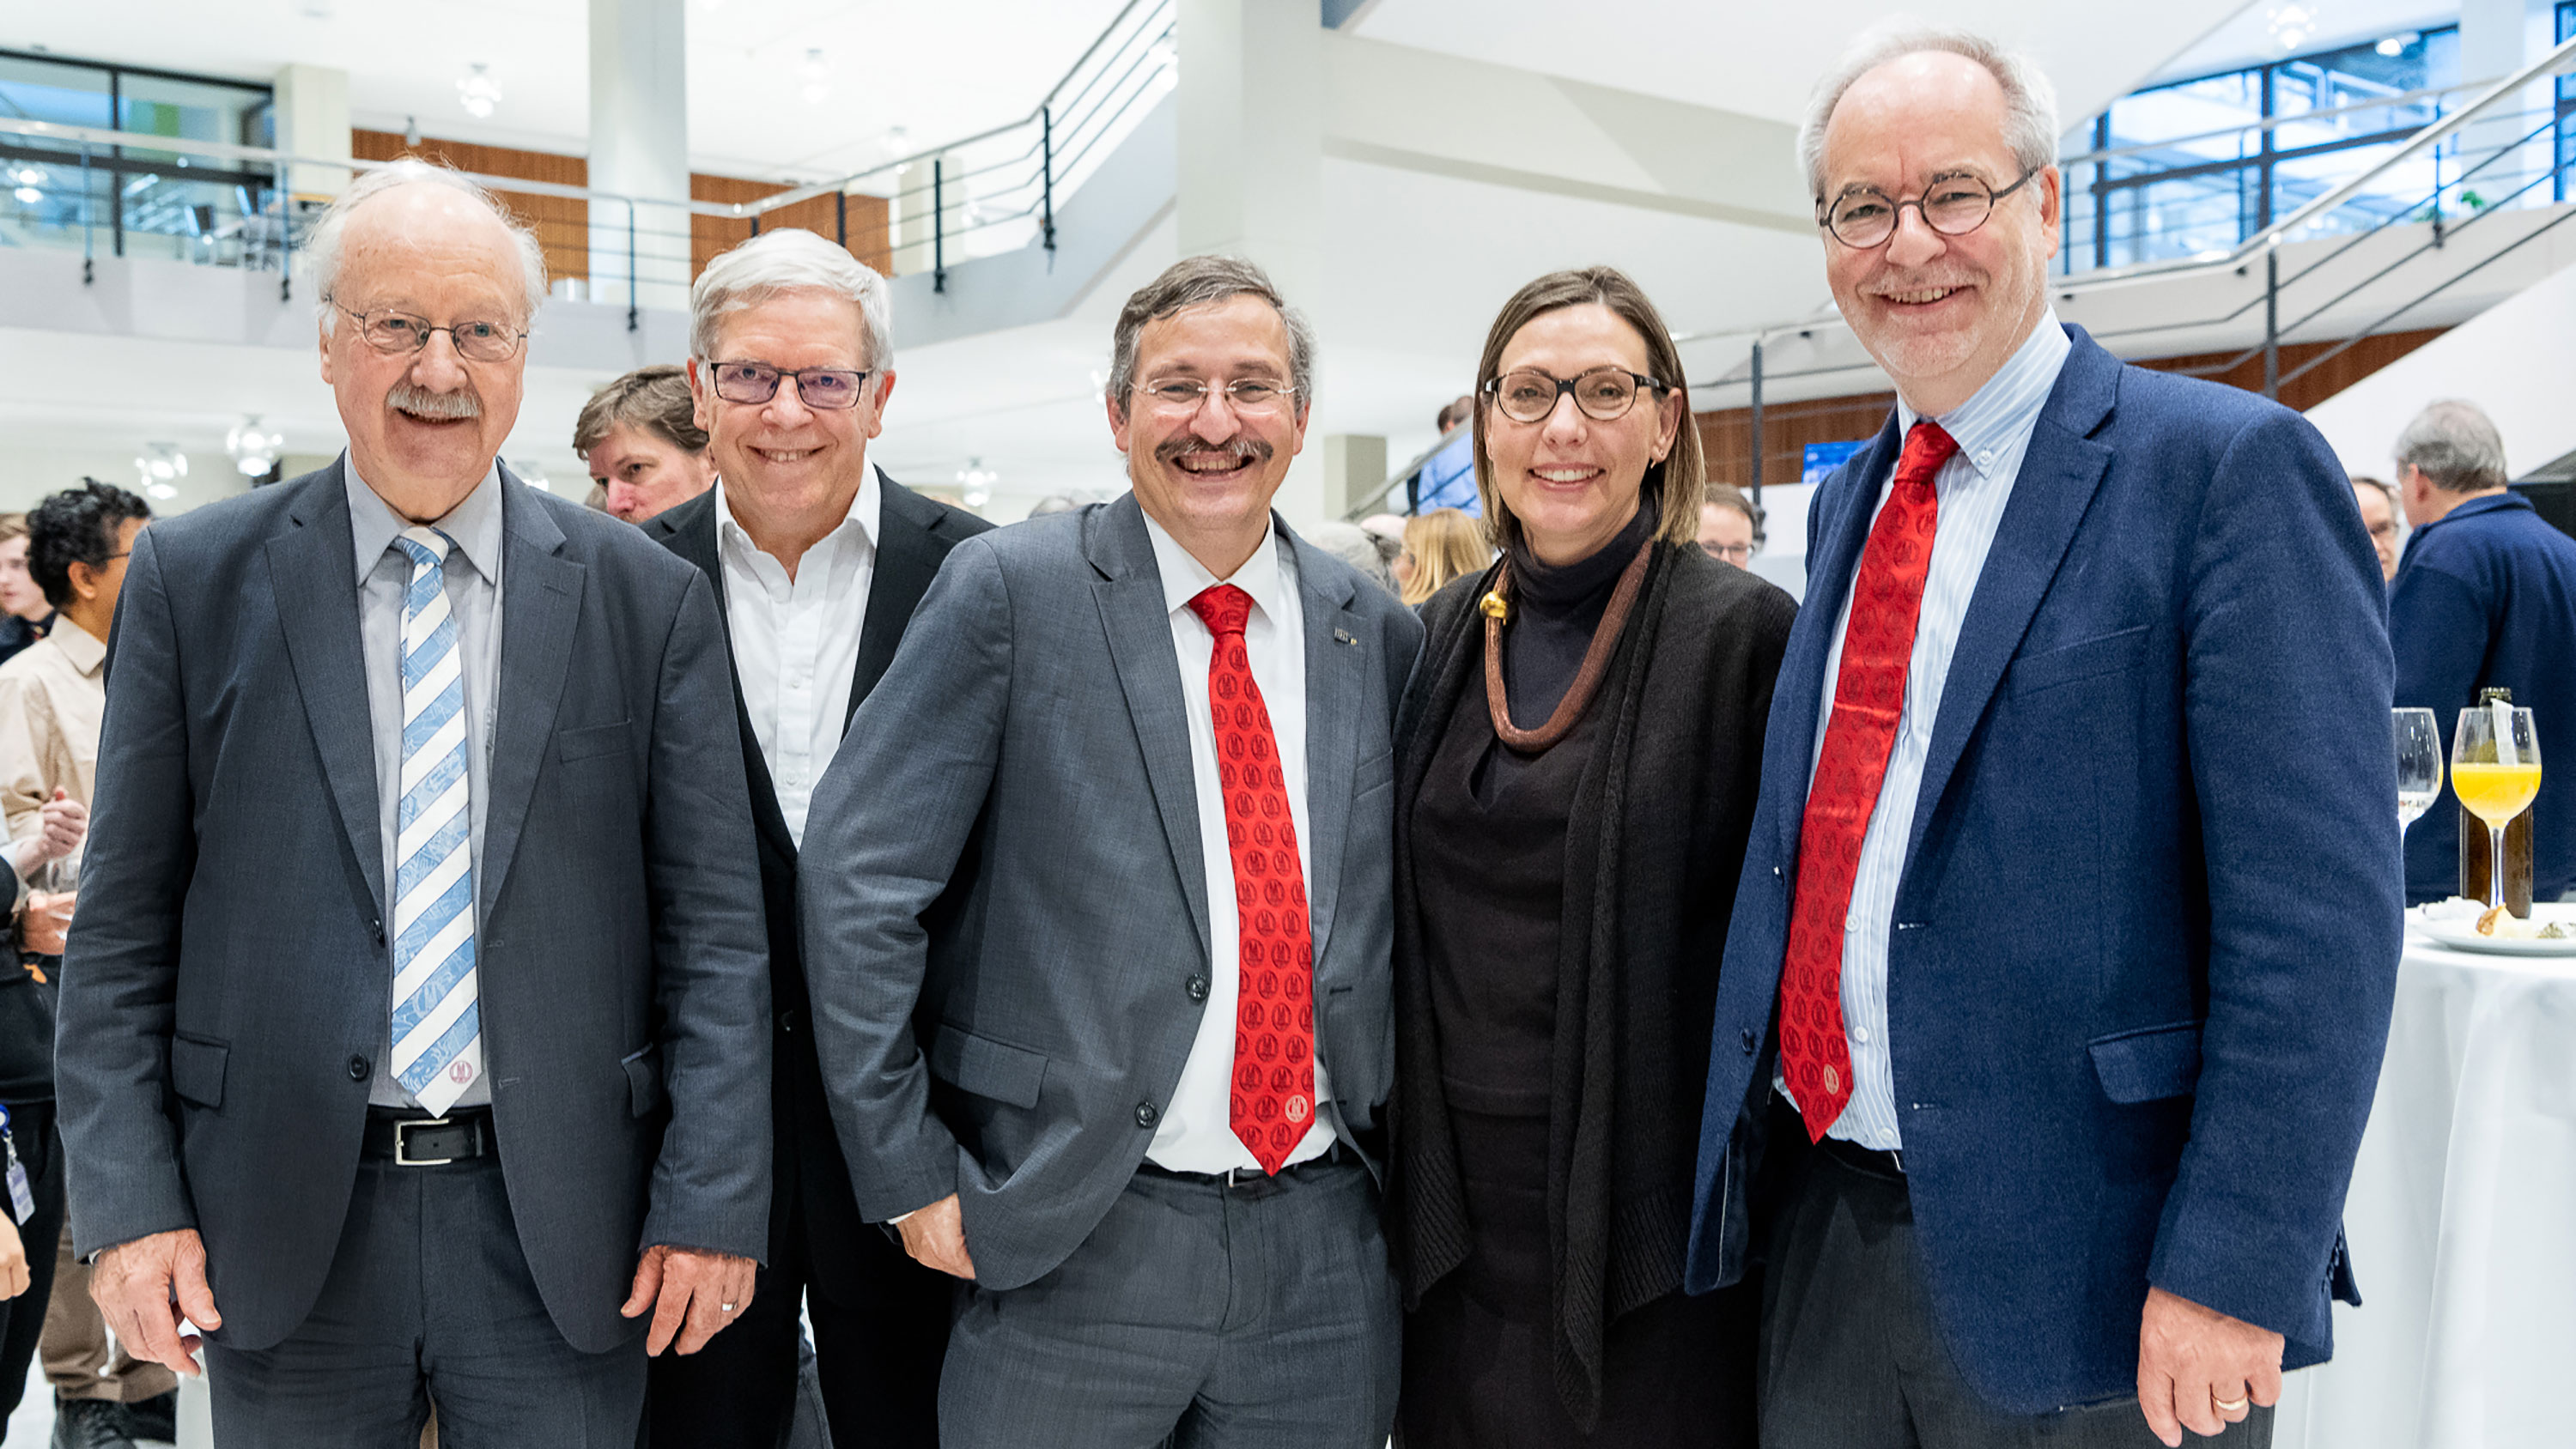 <p>Hans Weder (UZH President from 2000-2008), Andreas Fischer (UZH President from 2008-2013), President ad interim Gabriele Siegert and Otfried Jarren (President ad interim from 2013-2014) also attended the event at Irchel.</p> (Image: Frank Brüderli)